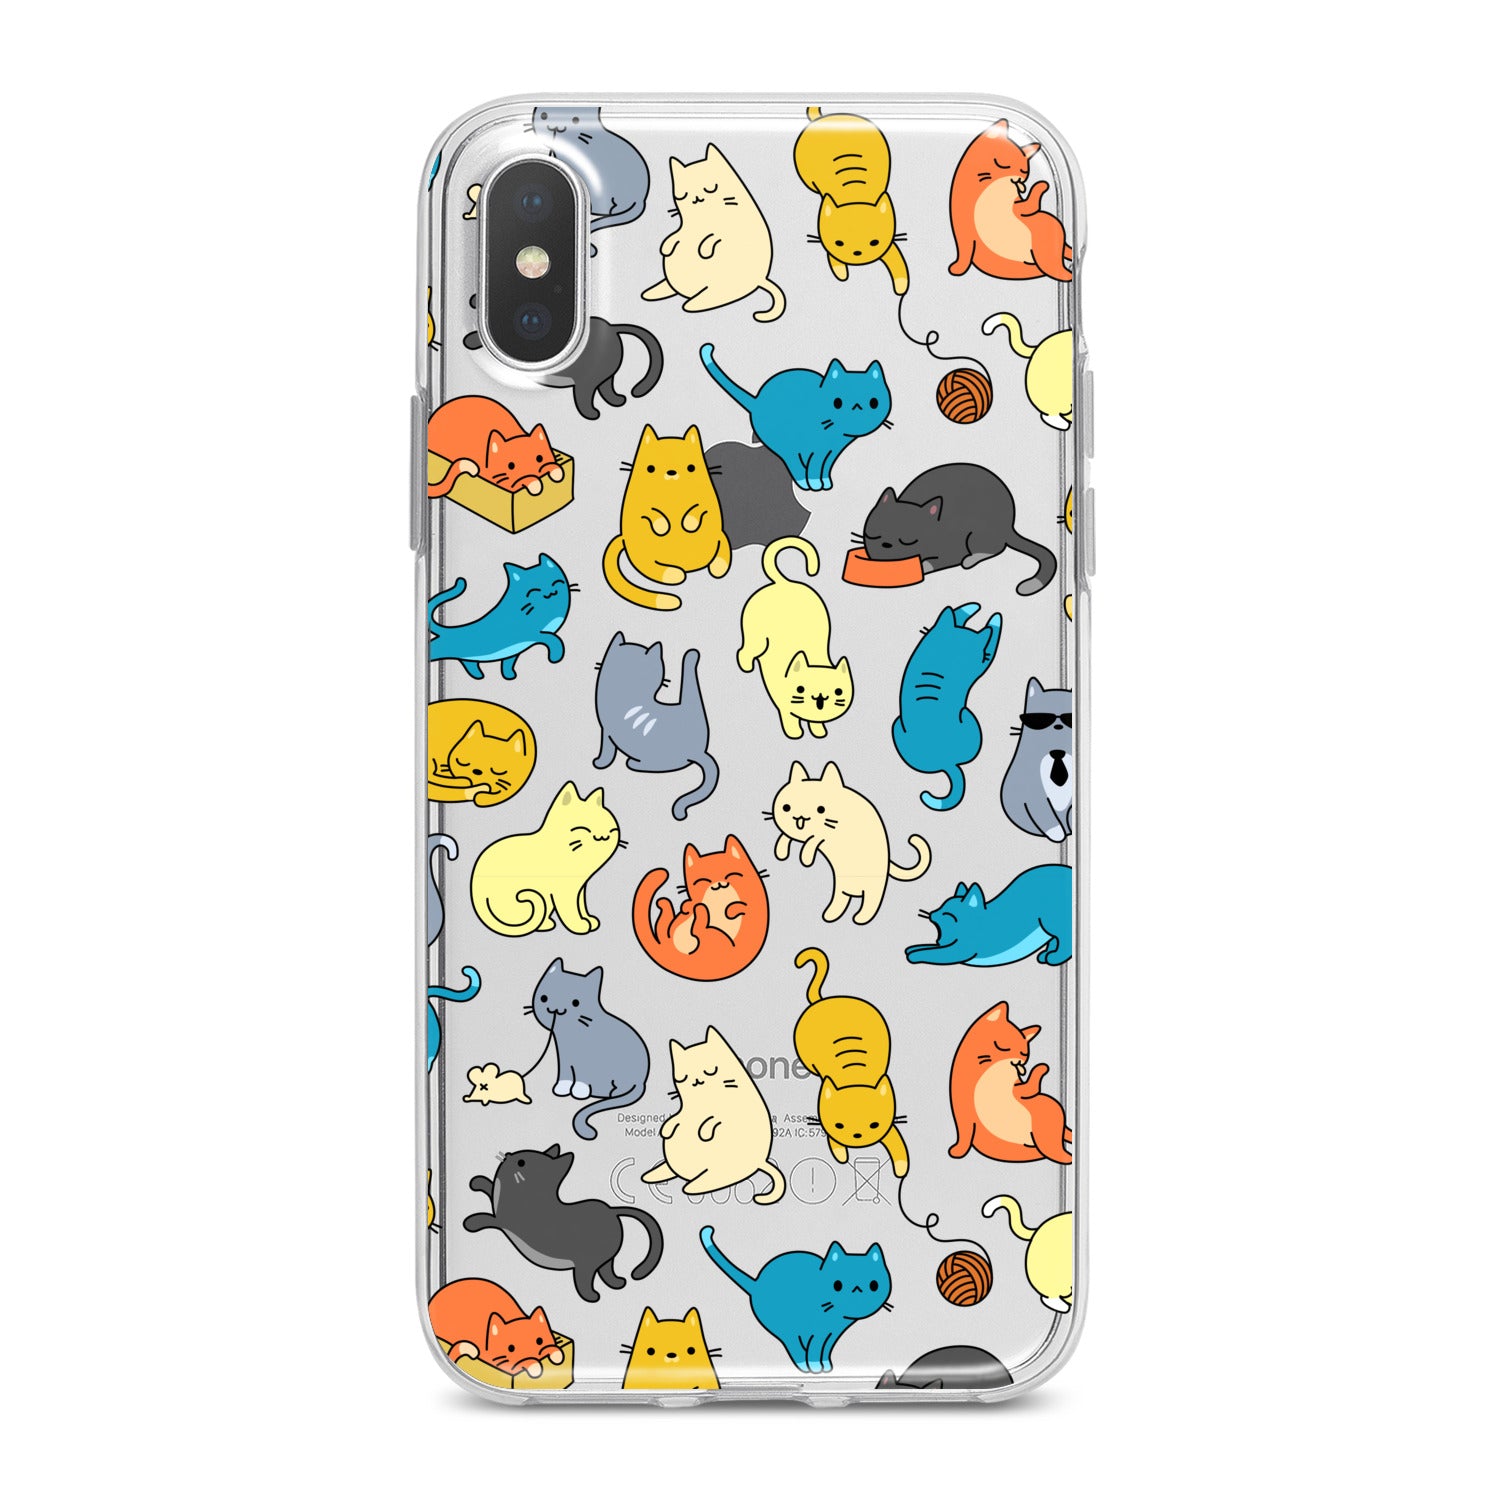 Lex Altern Colorful Cats Phone Case for your iPhone & Android phone.